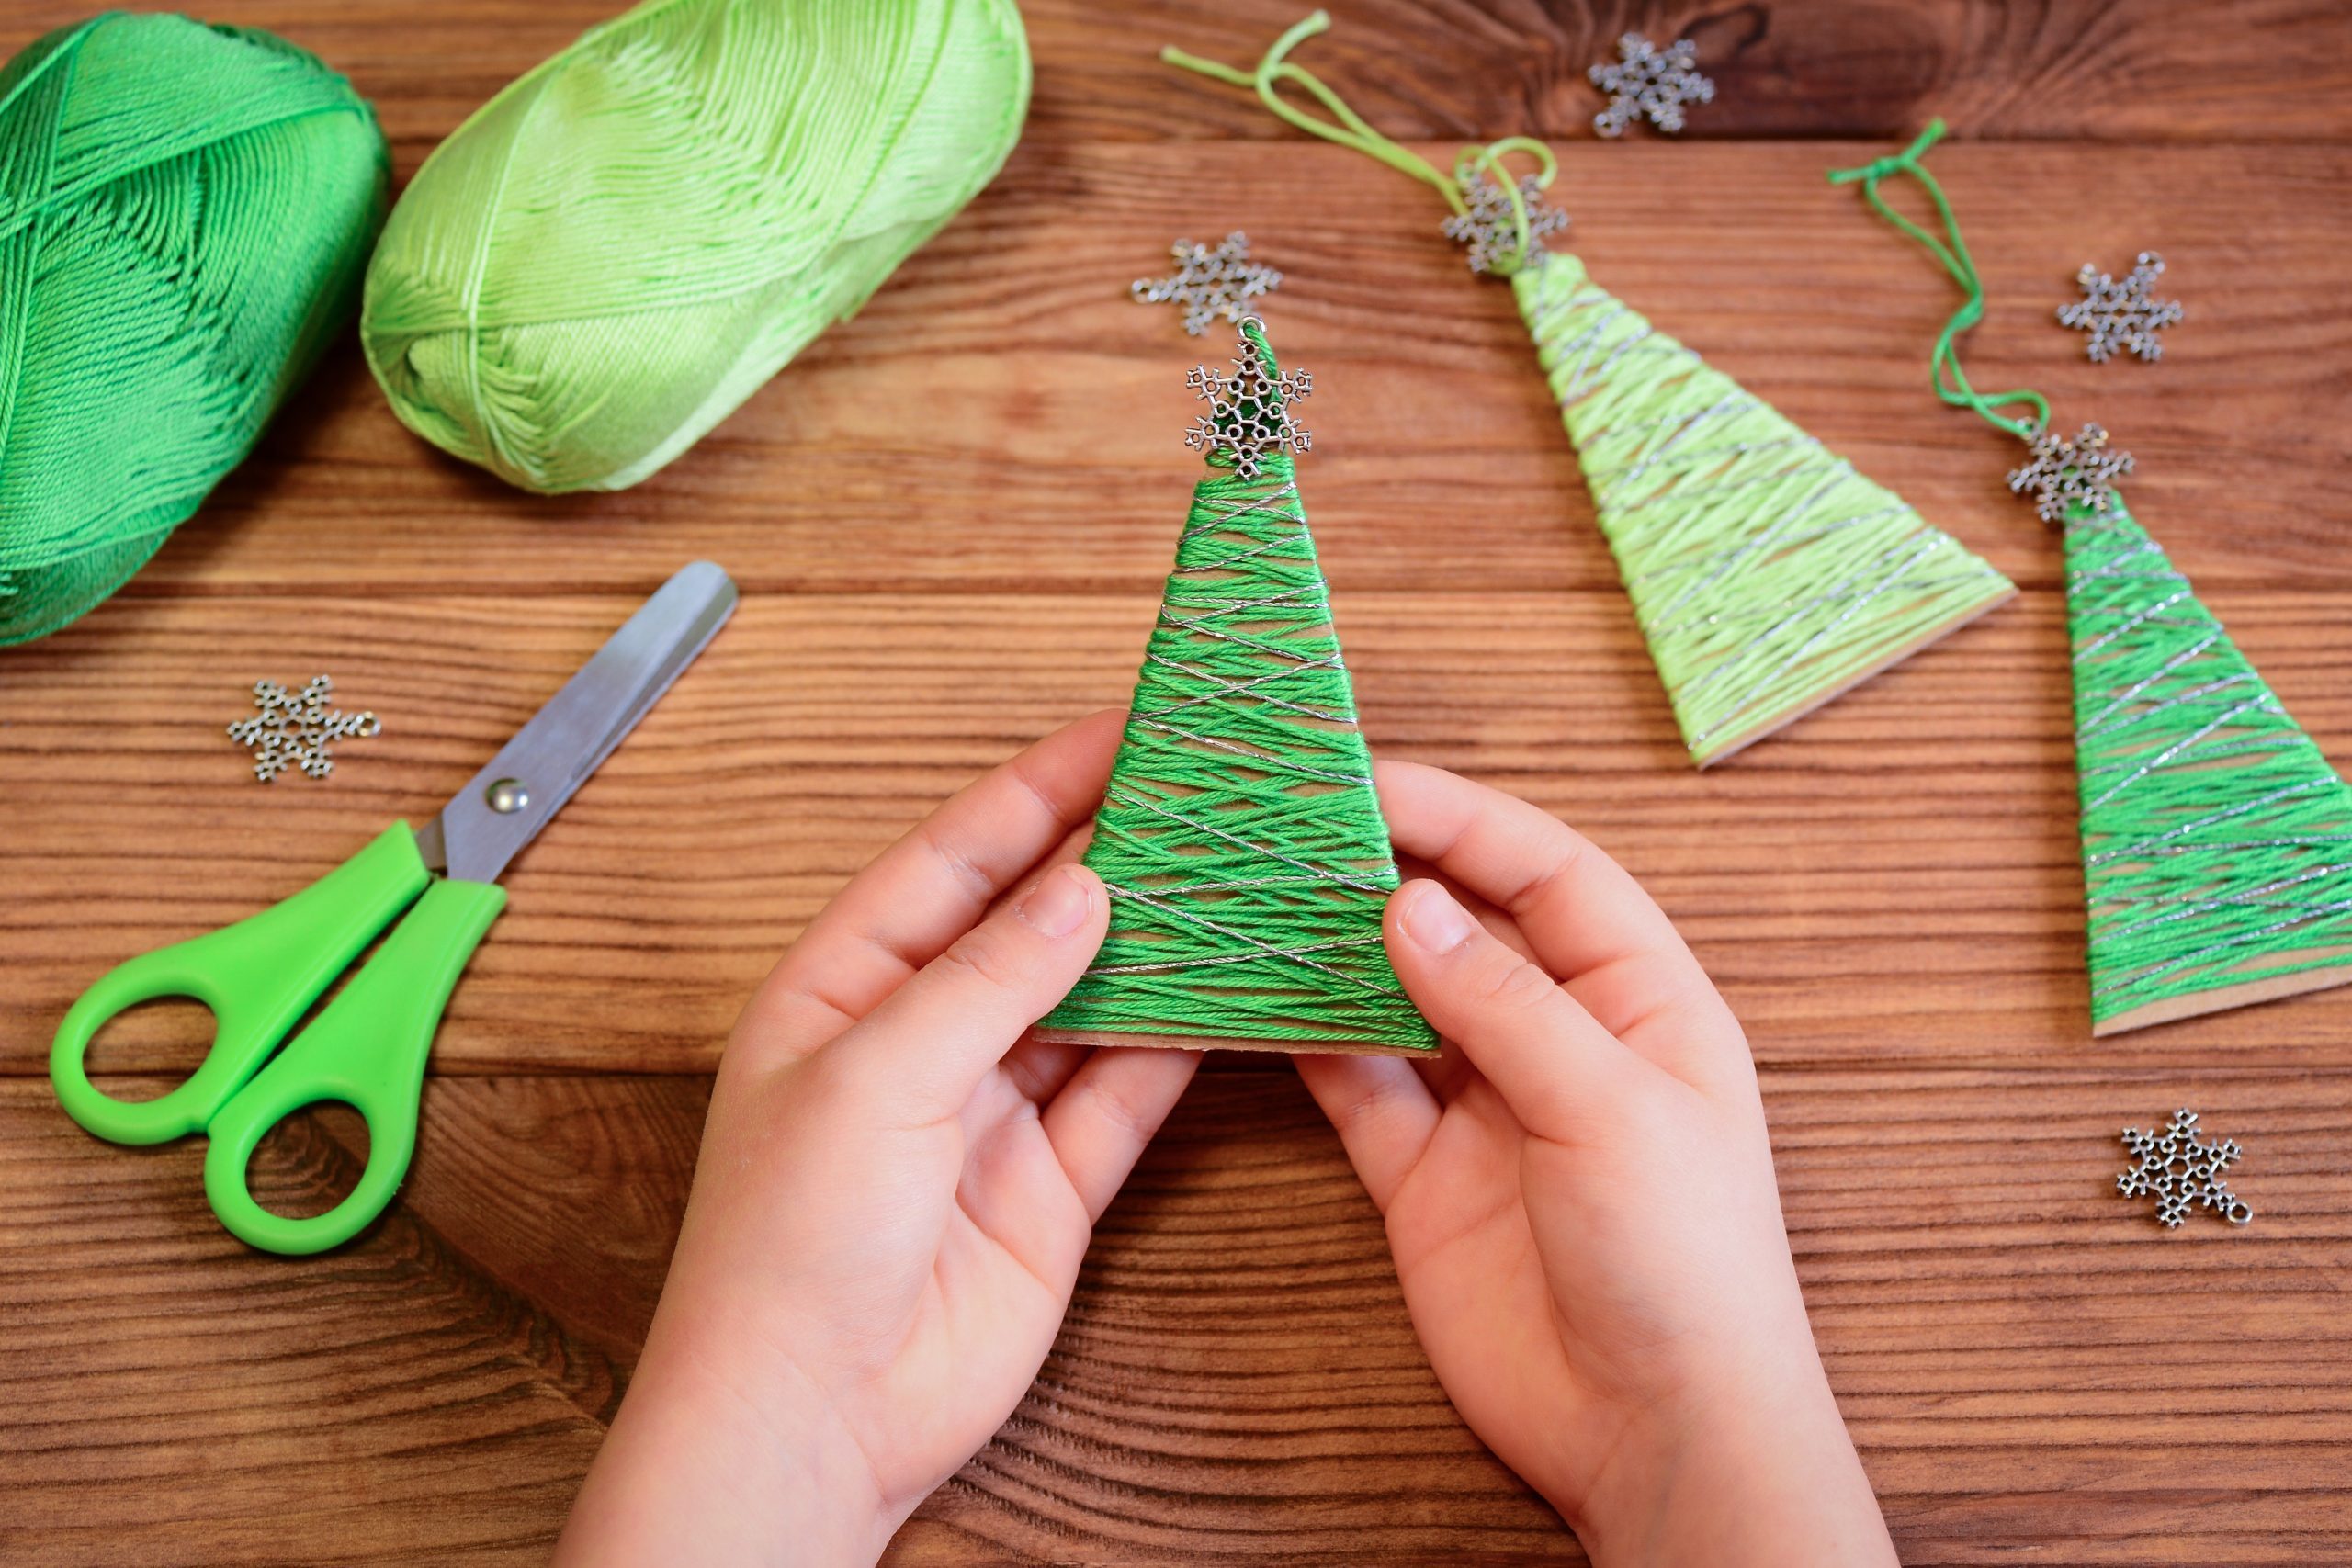 How to Make 4 Easy DIY Christmas Tree Crafts  A Visual Merriment: Kids  Crafts, Adult DIYs, Parties, Planning + Home Decor